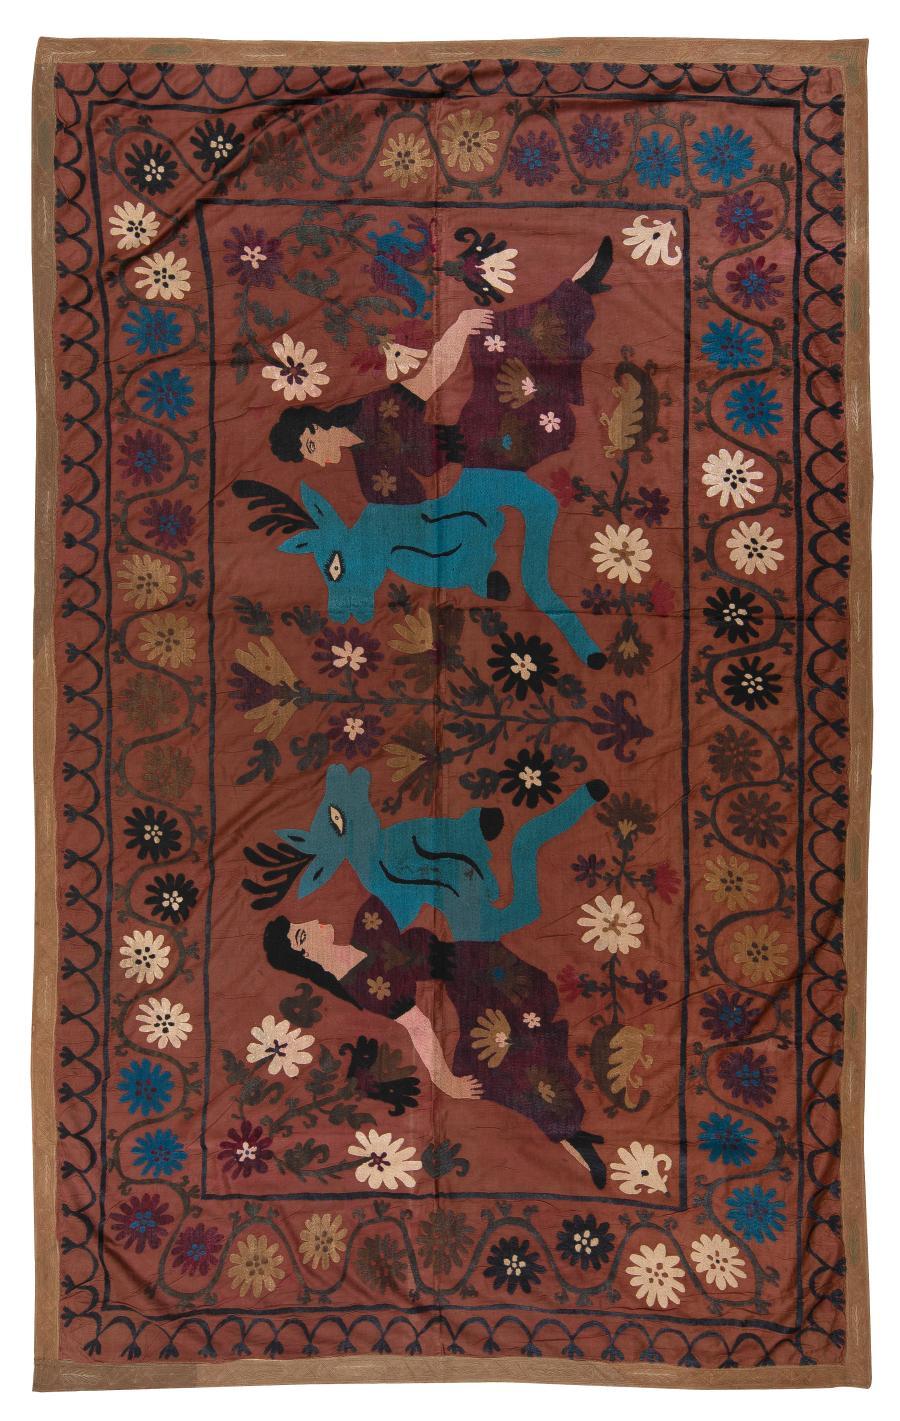 20th Century 4.8x7.5 Ft Vintage C.Asian Suzani Textile, Embroidered Wall Hanging or Bed Cover